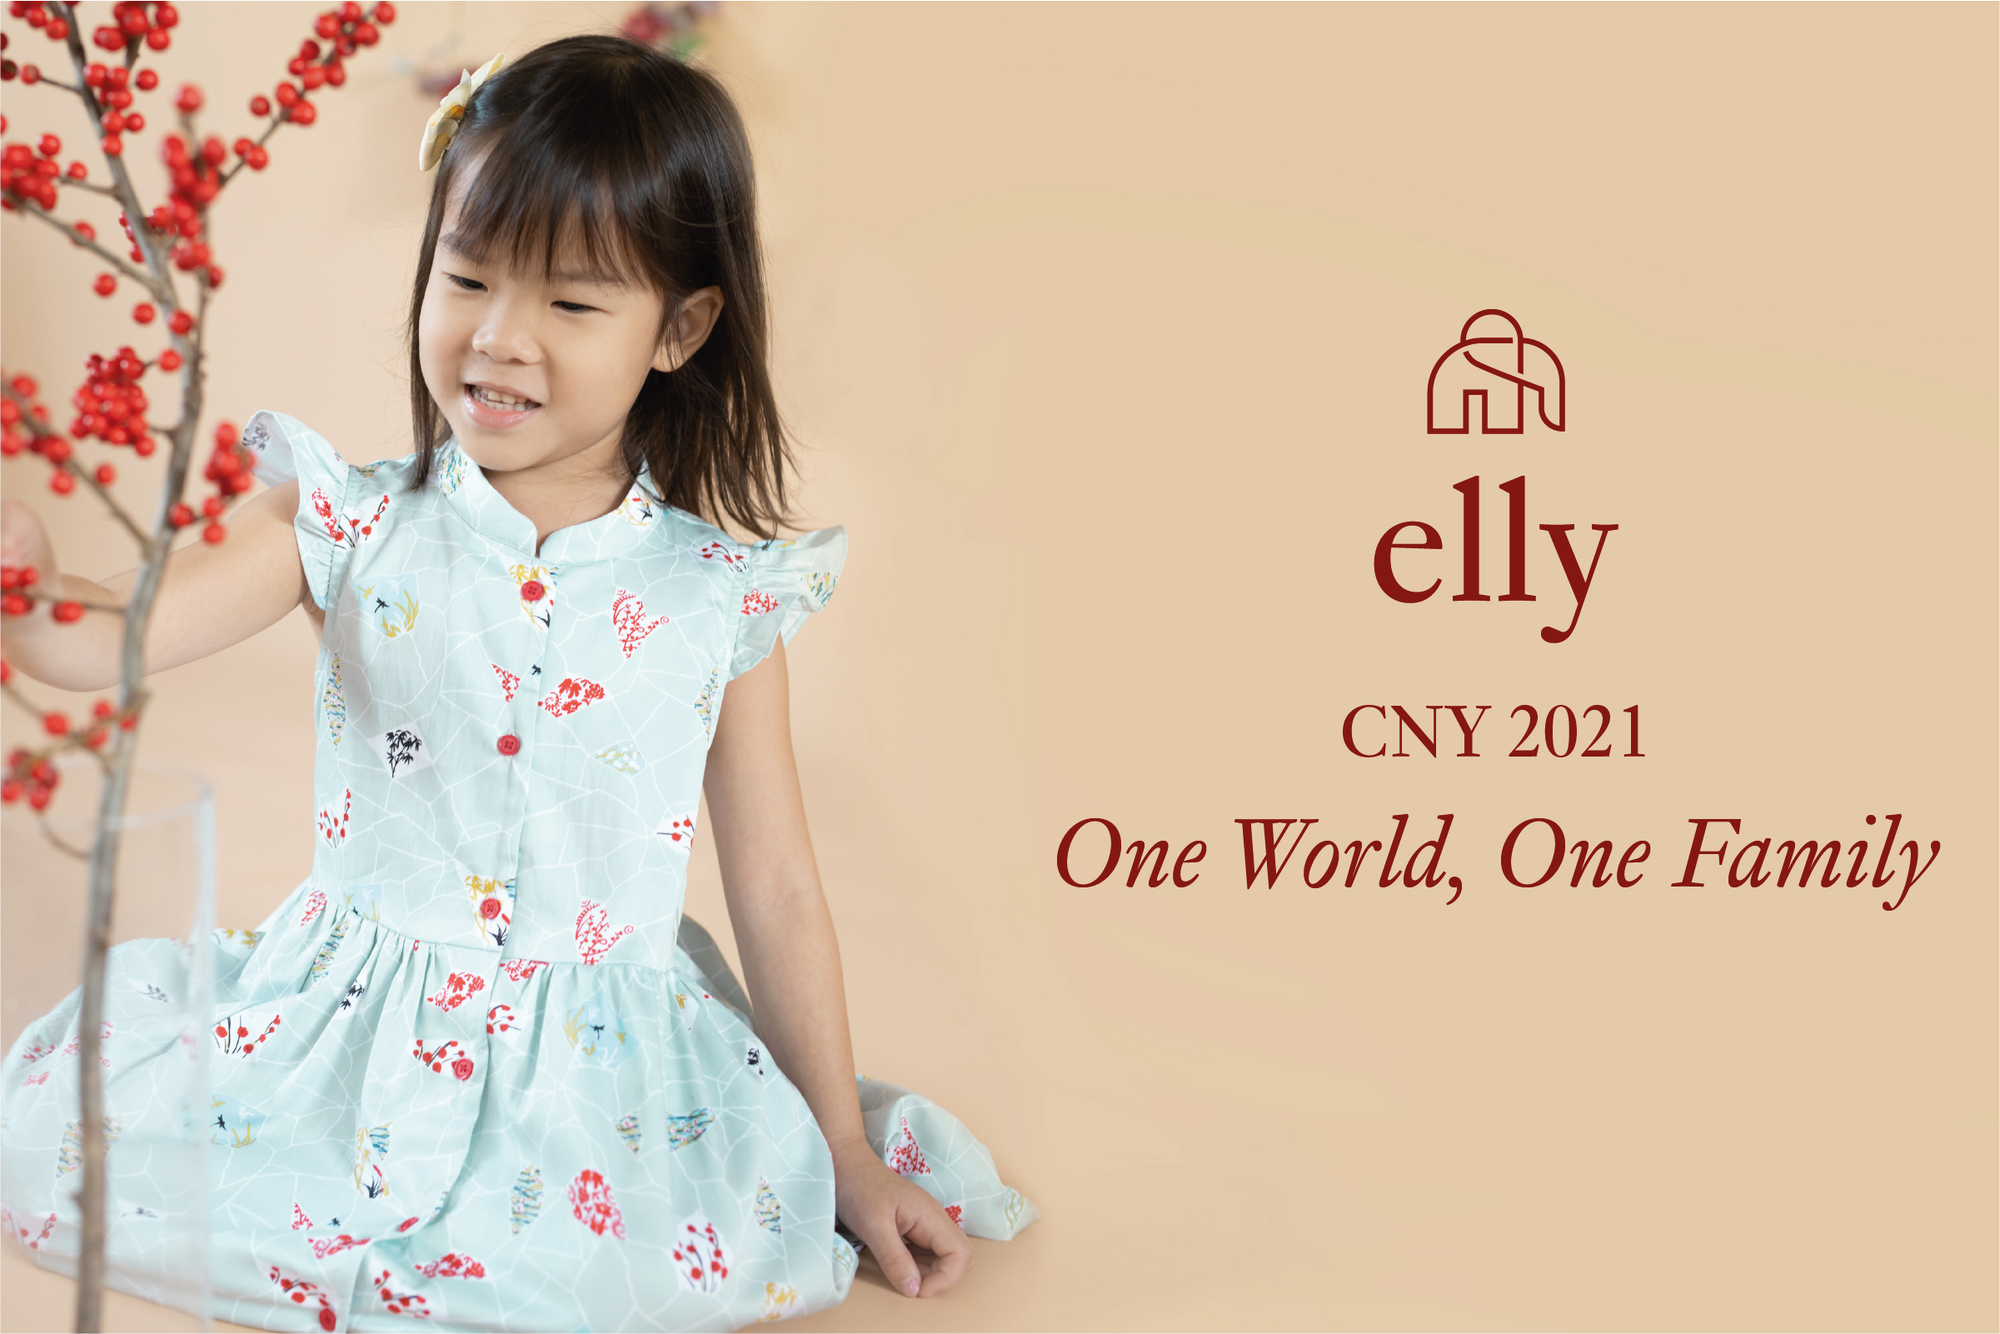 Elly CNY 2021 "One World, One Family" - Frequently Asked Questions